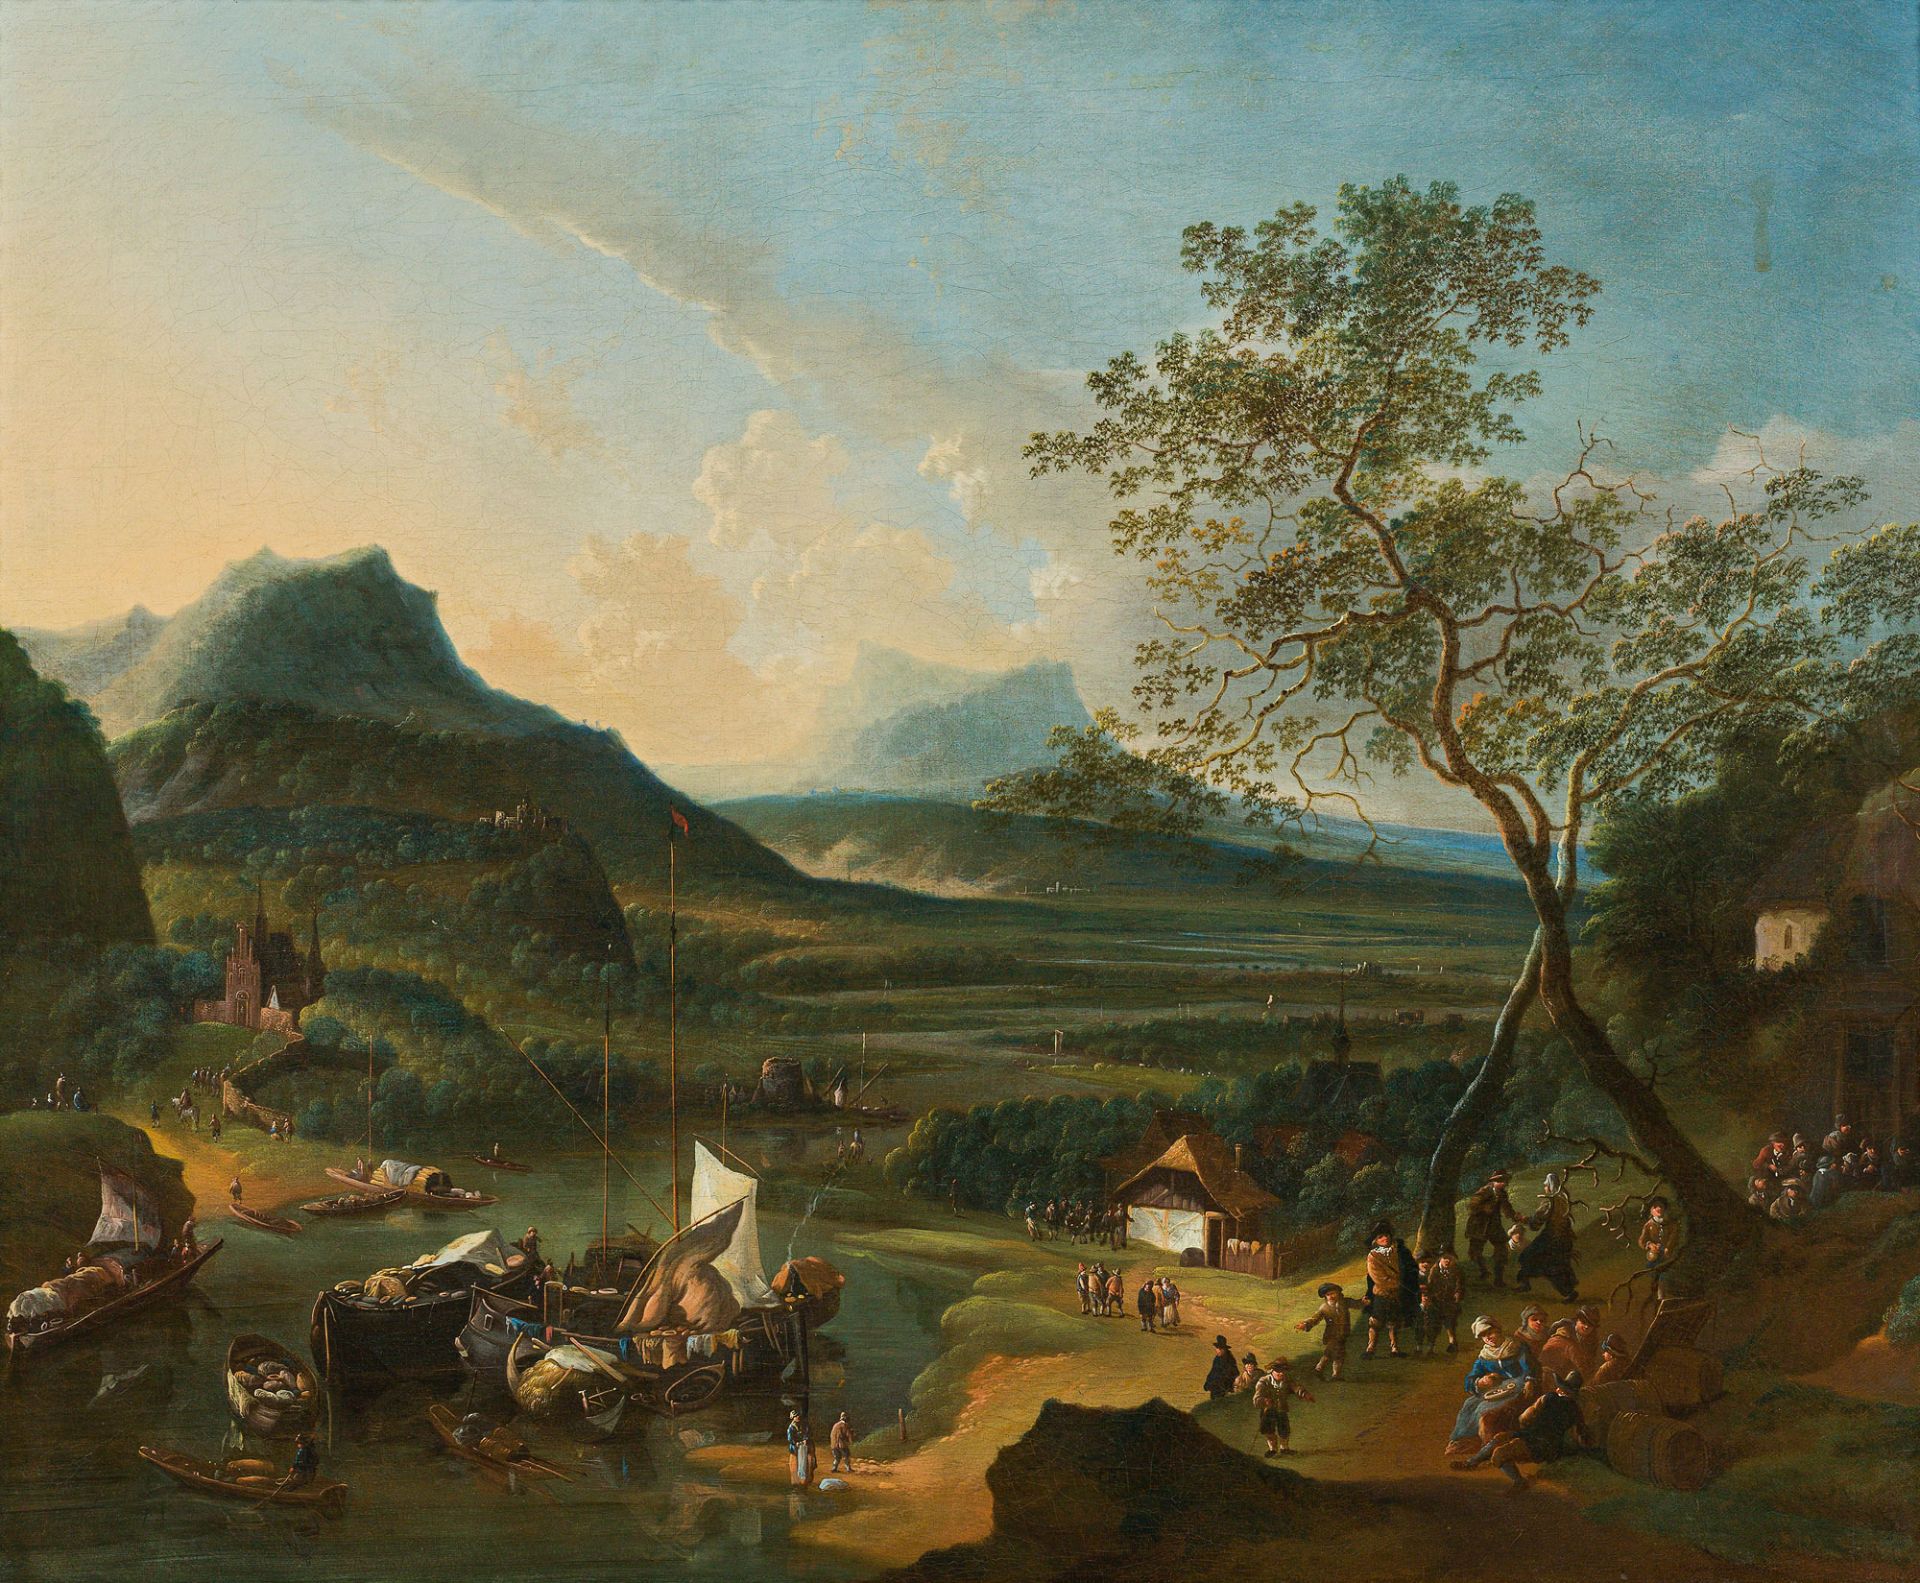 Robert GriffierRiver landscape (probably on the Rhine or the Mosel)oil on canvas45.5 x 54 cmsigned